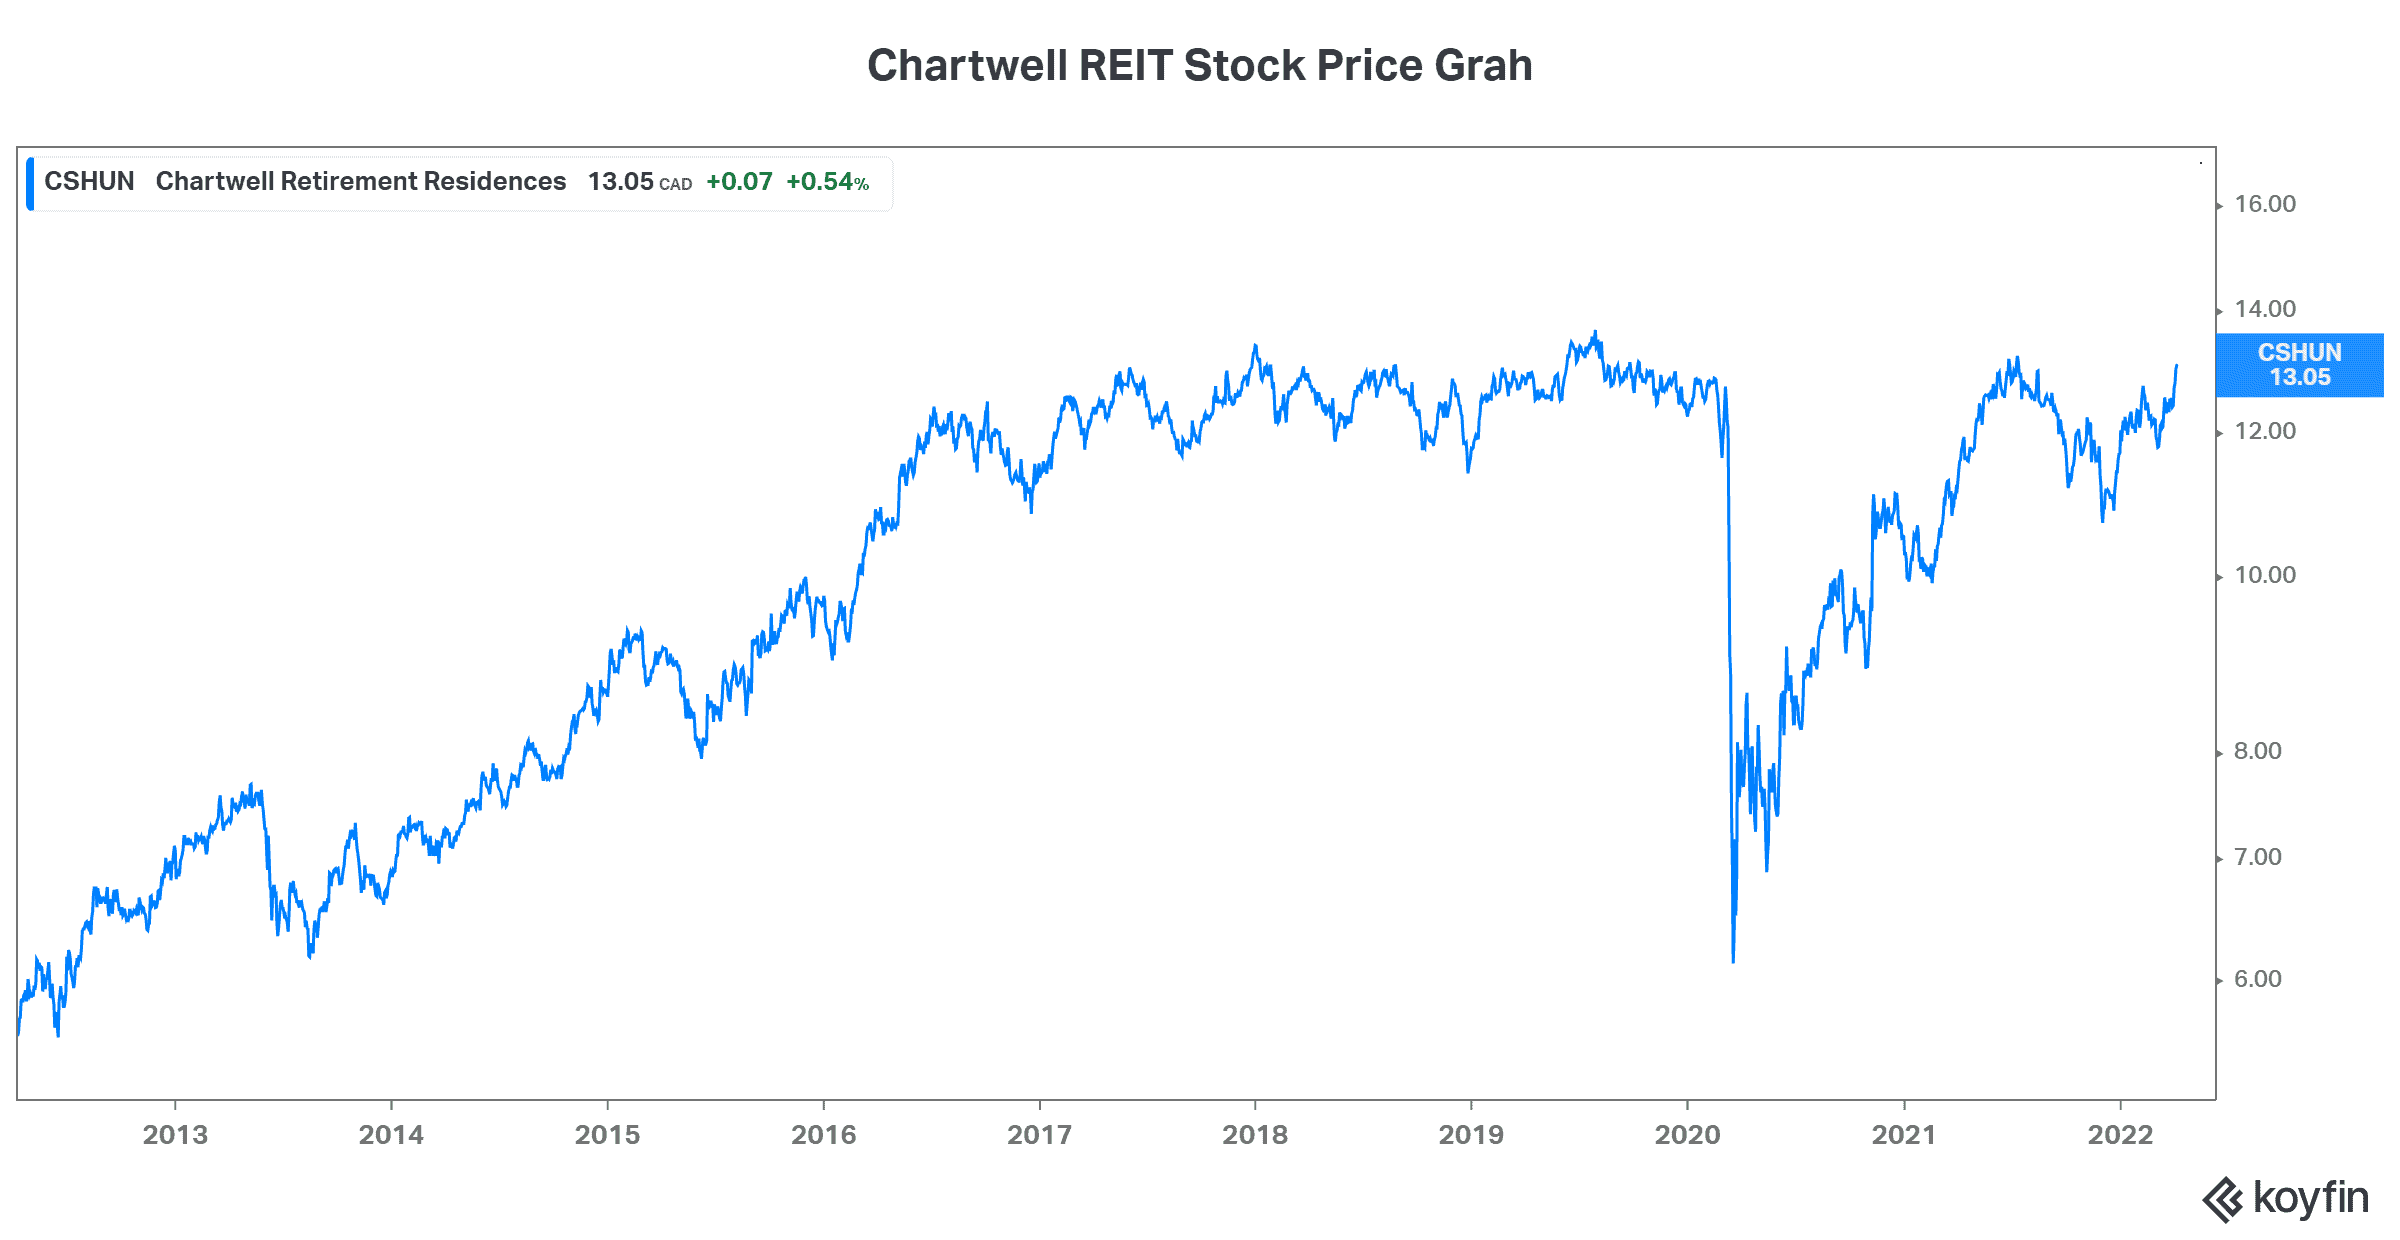 Dividend stock Chartwell REIT passive income